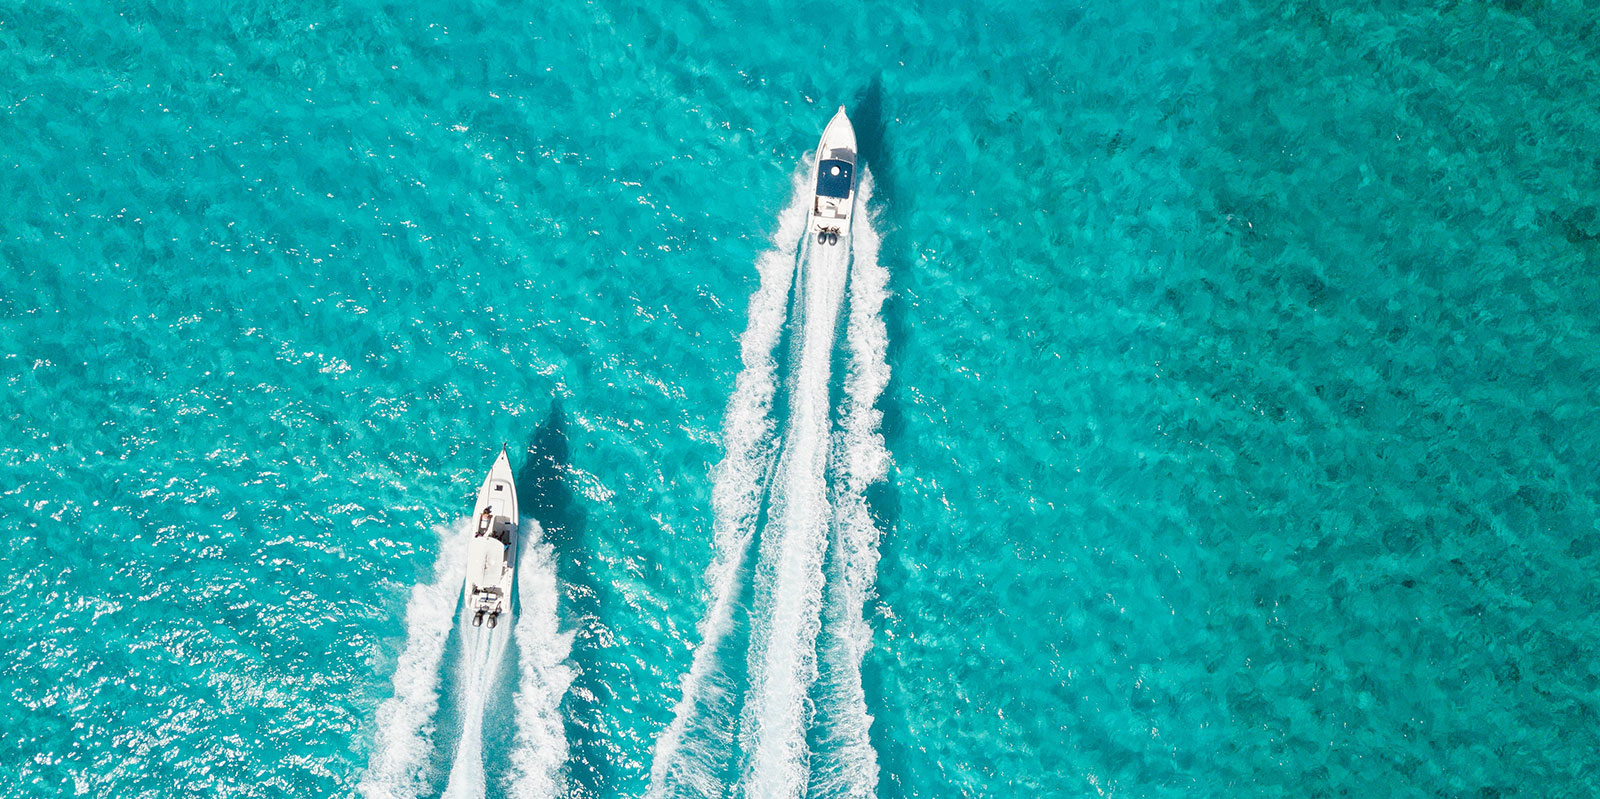 Jet skis racing on the waters of The Bahamas